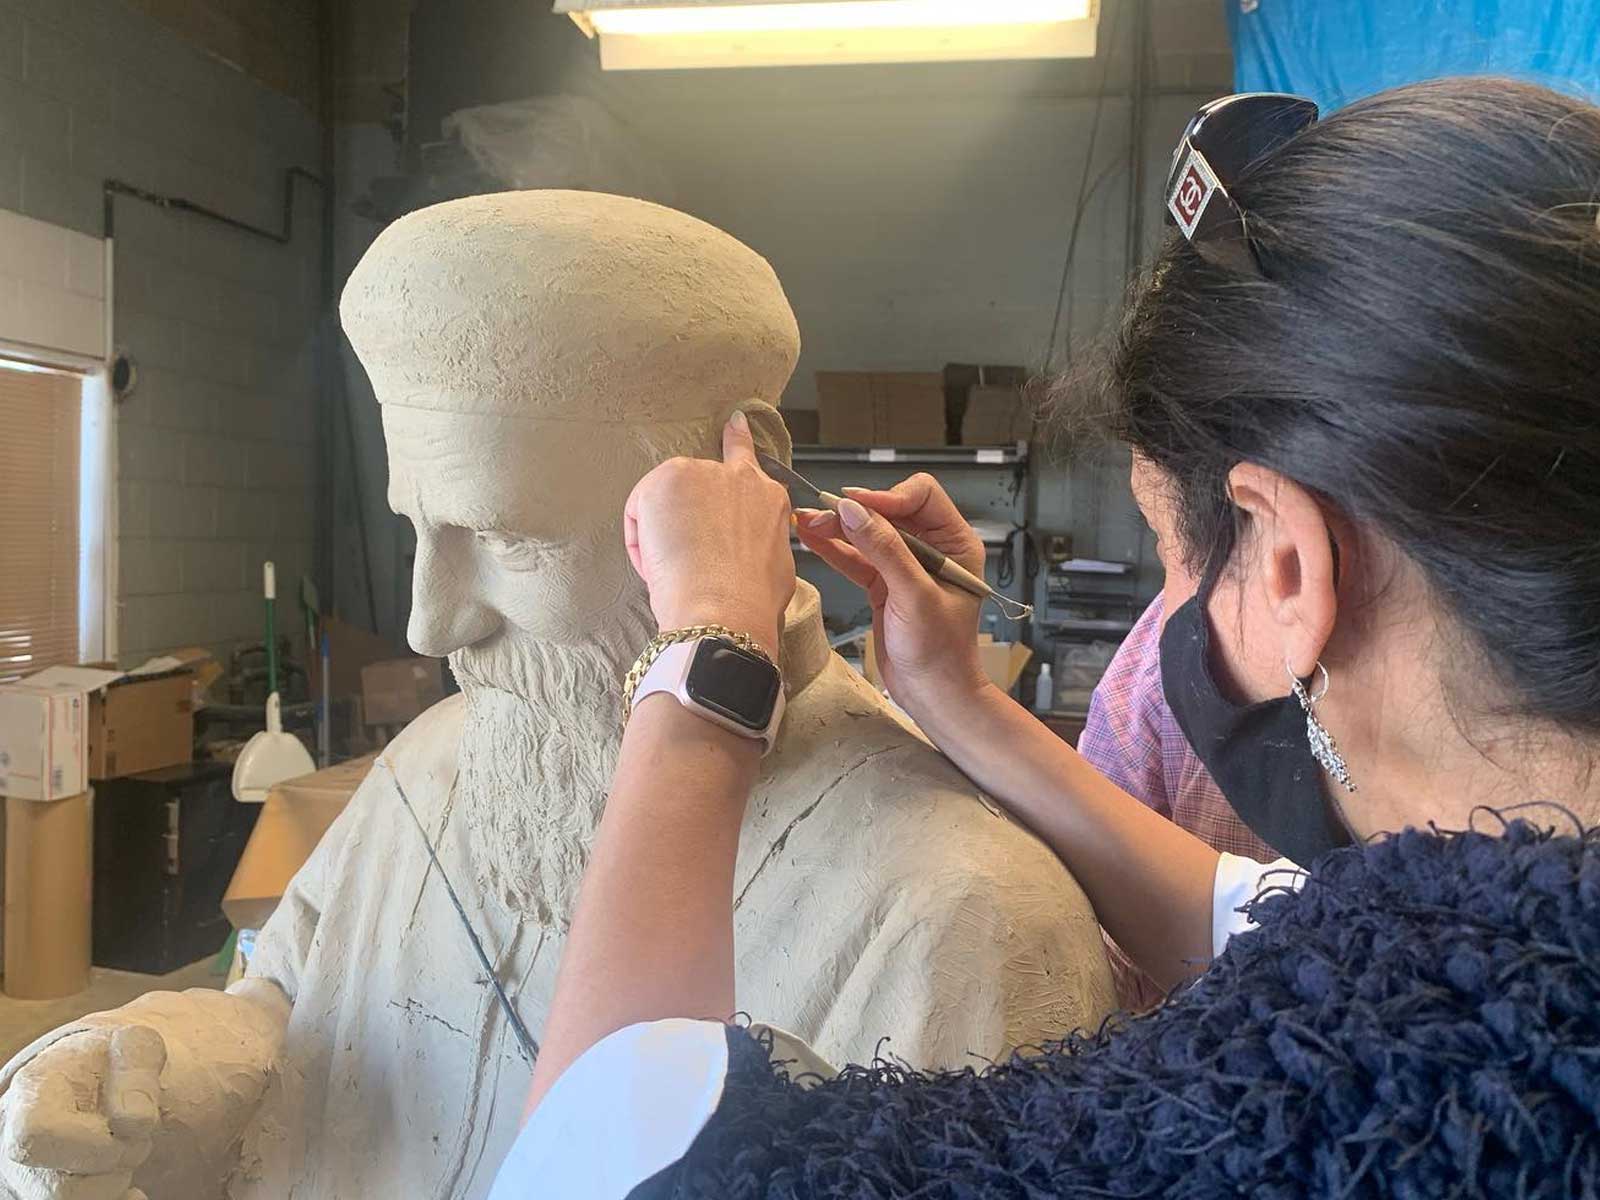 What Considerations Are Needed When Buying a Bust Statue